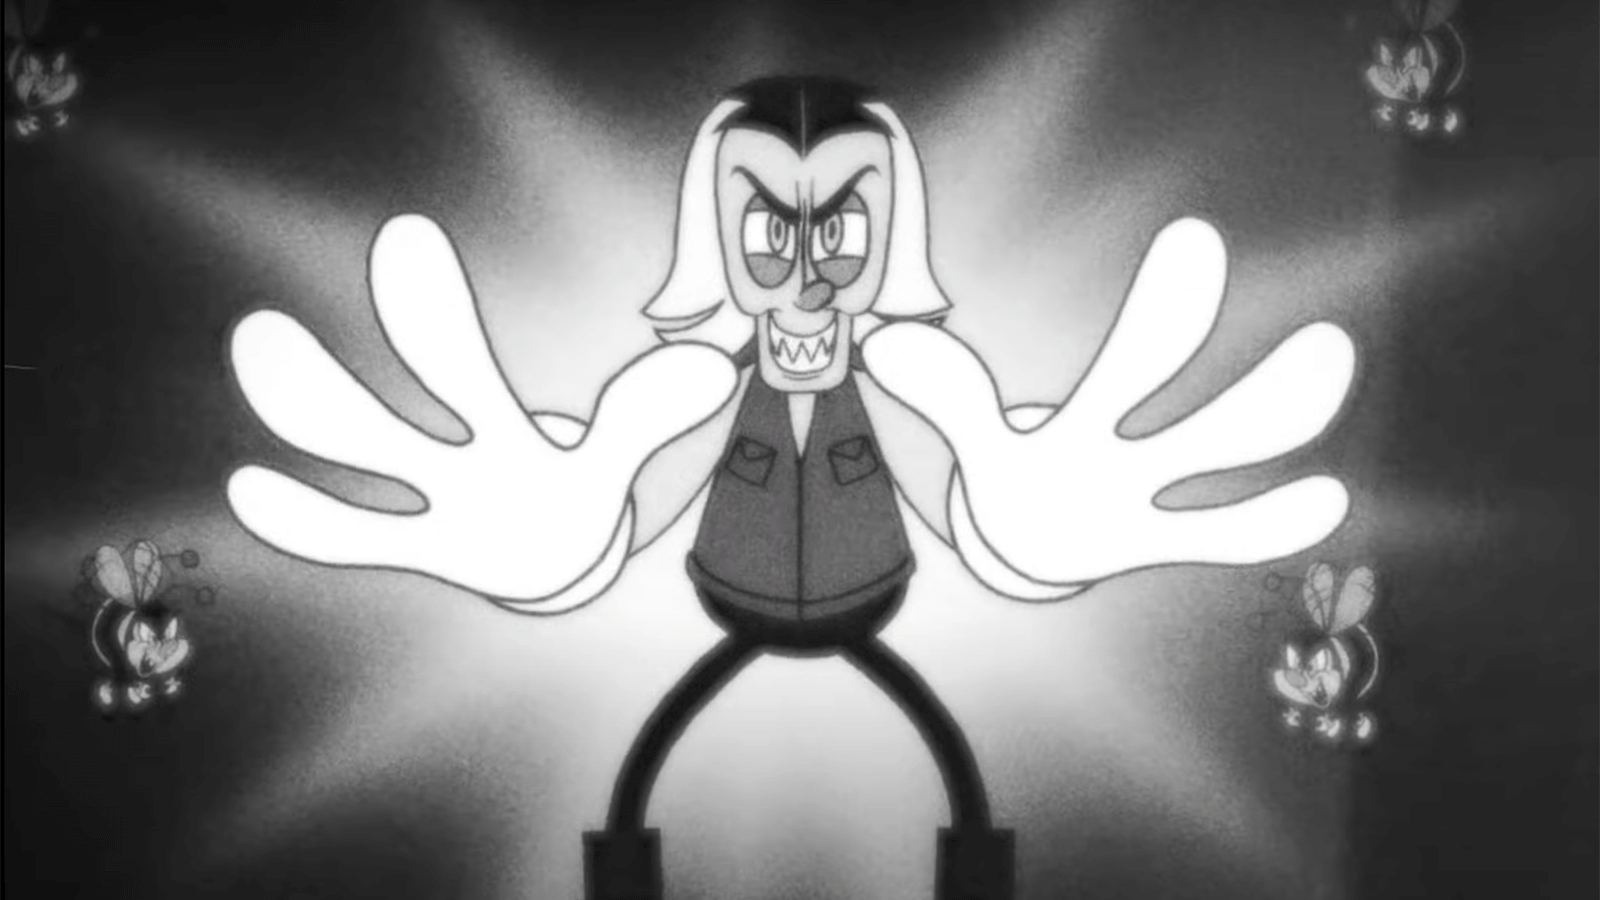 GHOSTEMANE RELEASES ANIMATED MUSIC VIDEO FOR NEW SINGLE AI - CaliberTV